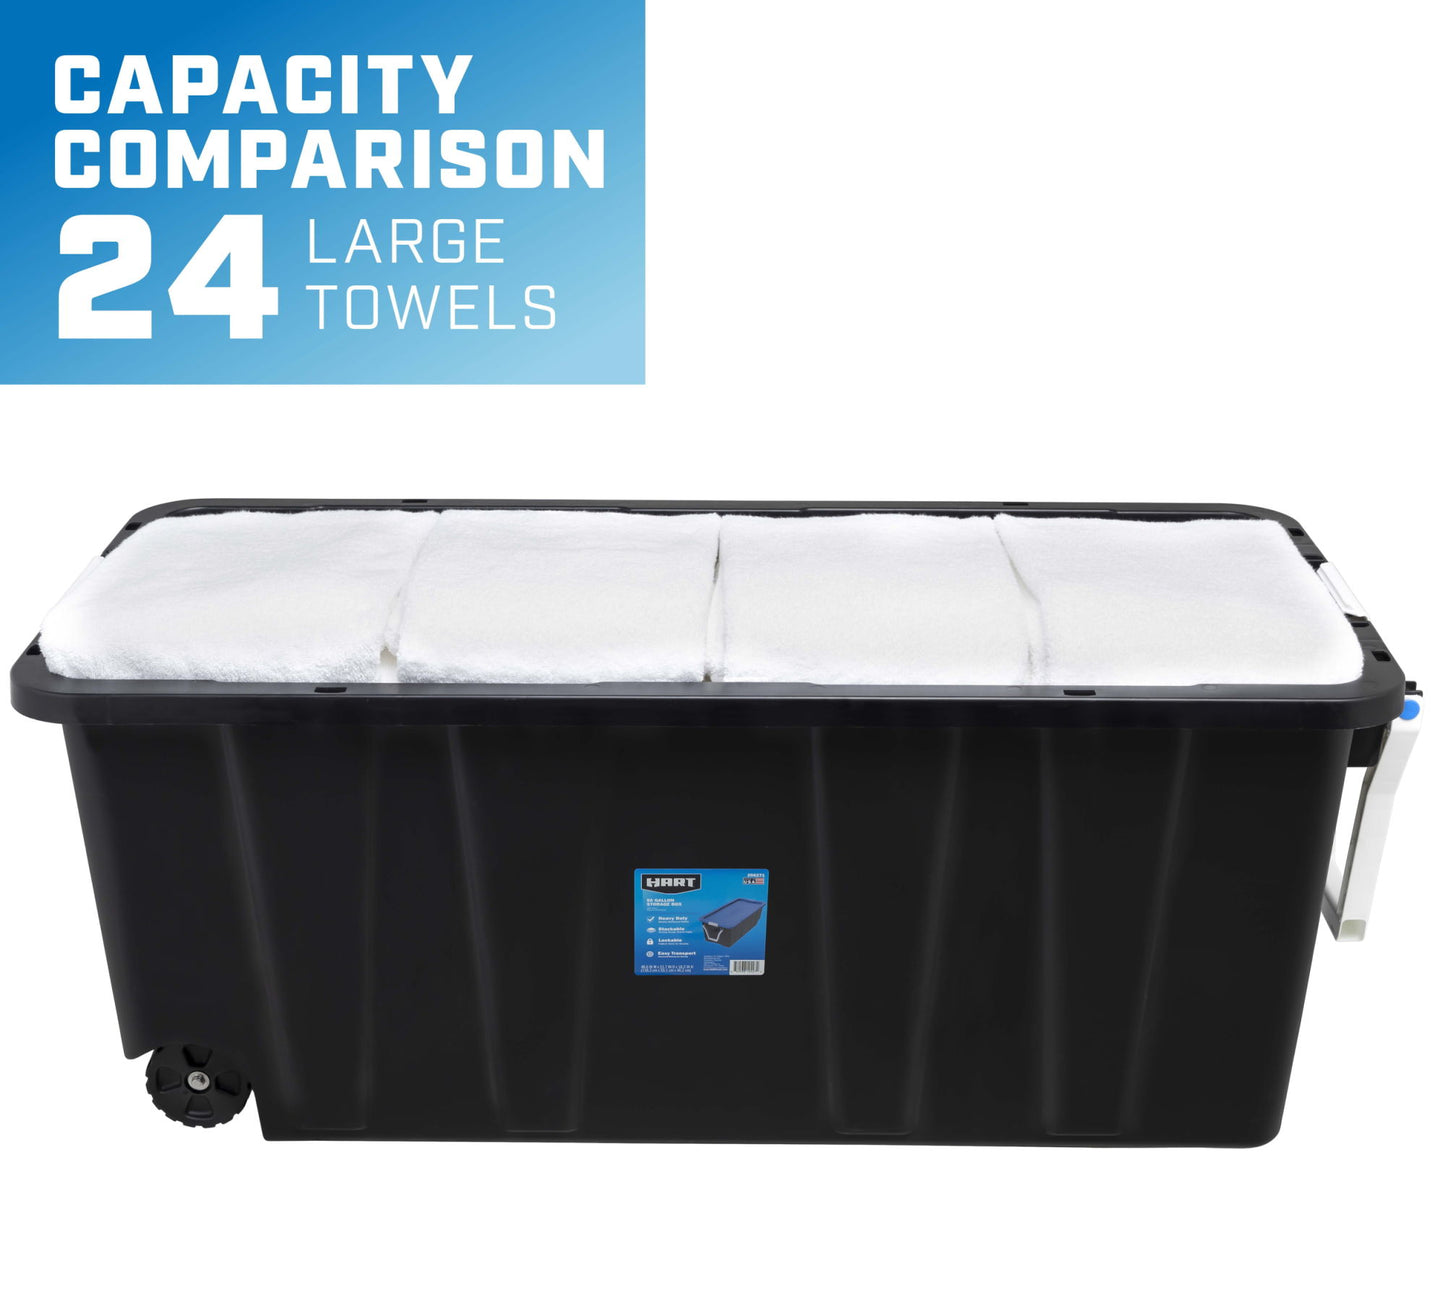 50 Gallon Rolling Plastic Storage Bin Container with Pull Handle, Black with Blue Lid, Set of 2